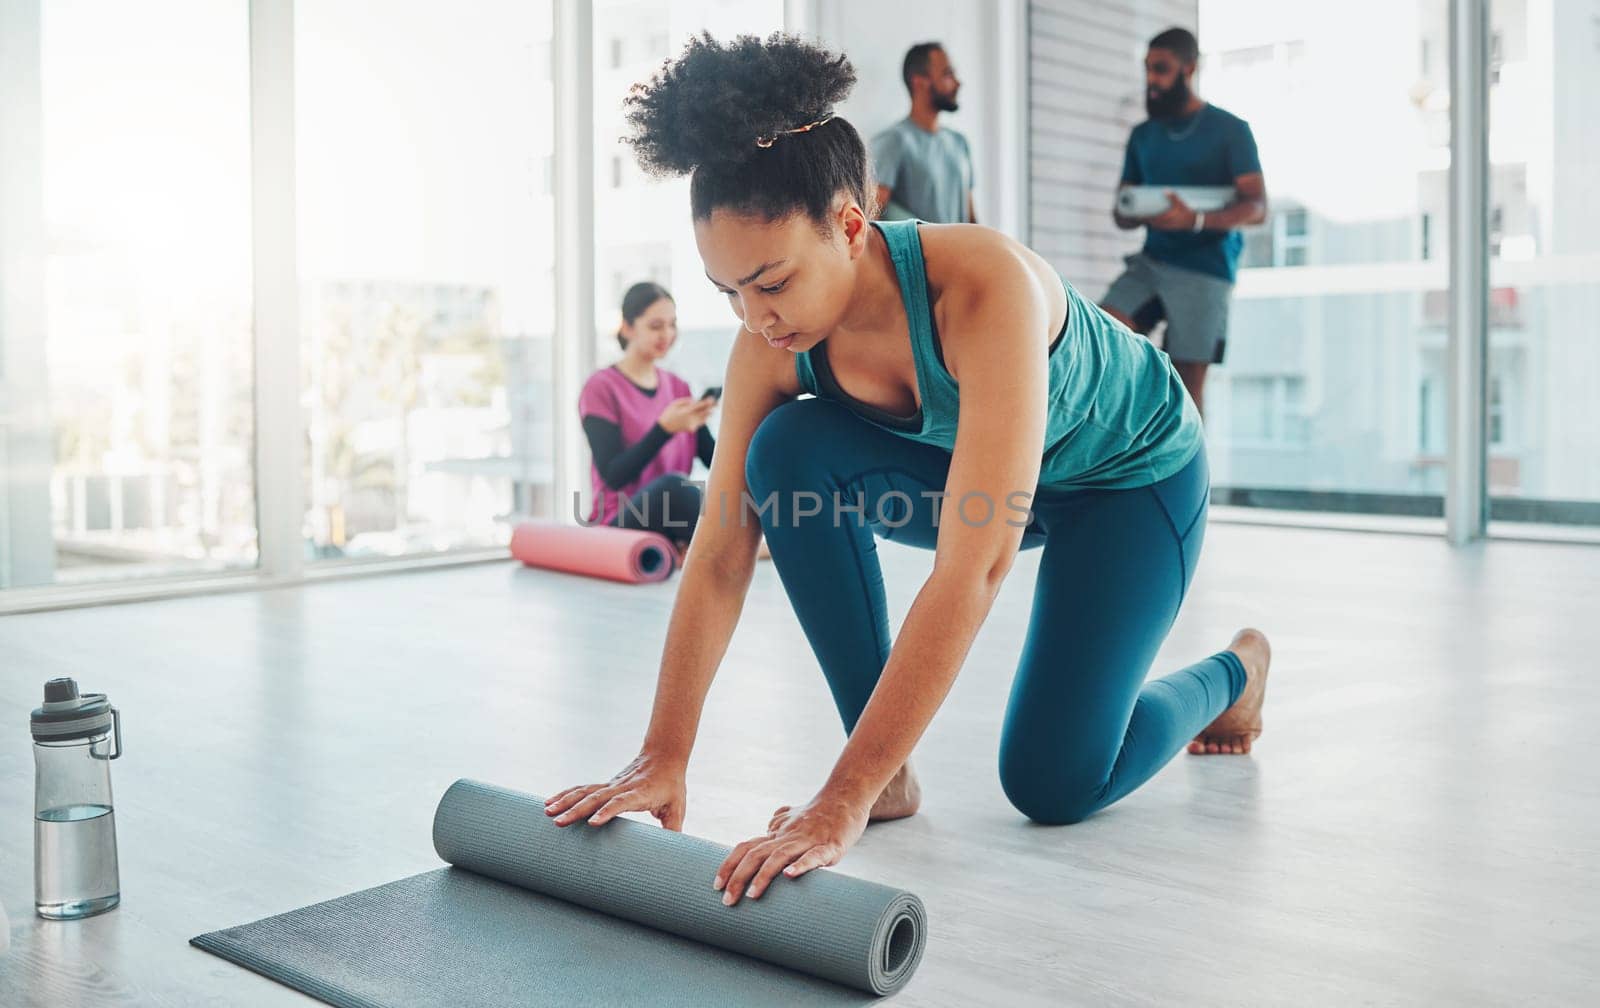 Yoga, studio and exercise mat with a fitness black woman getting ready for a wellness workout. Gym, training and zen with a female yogi indoor for mental health, balance or spiritual health.